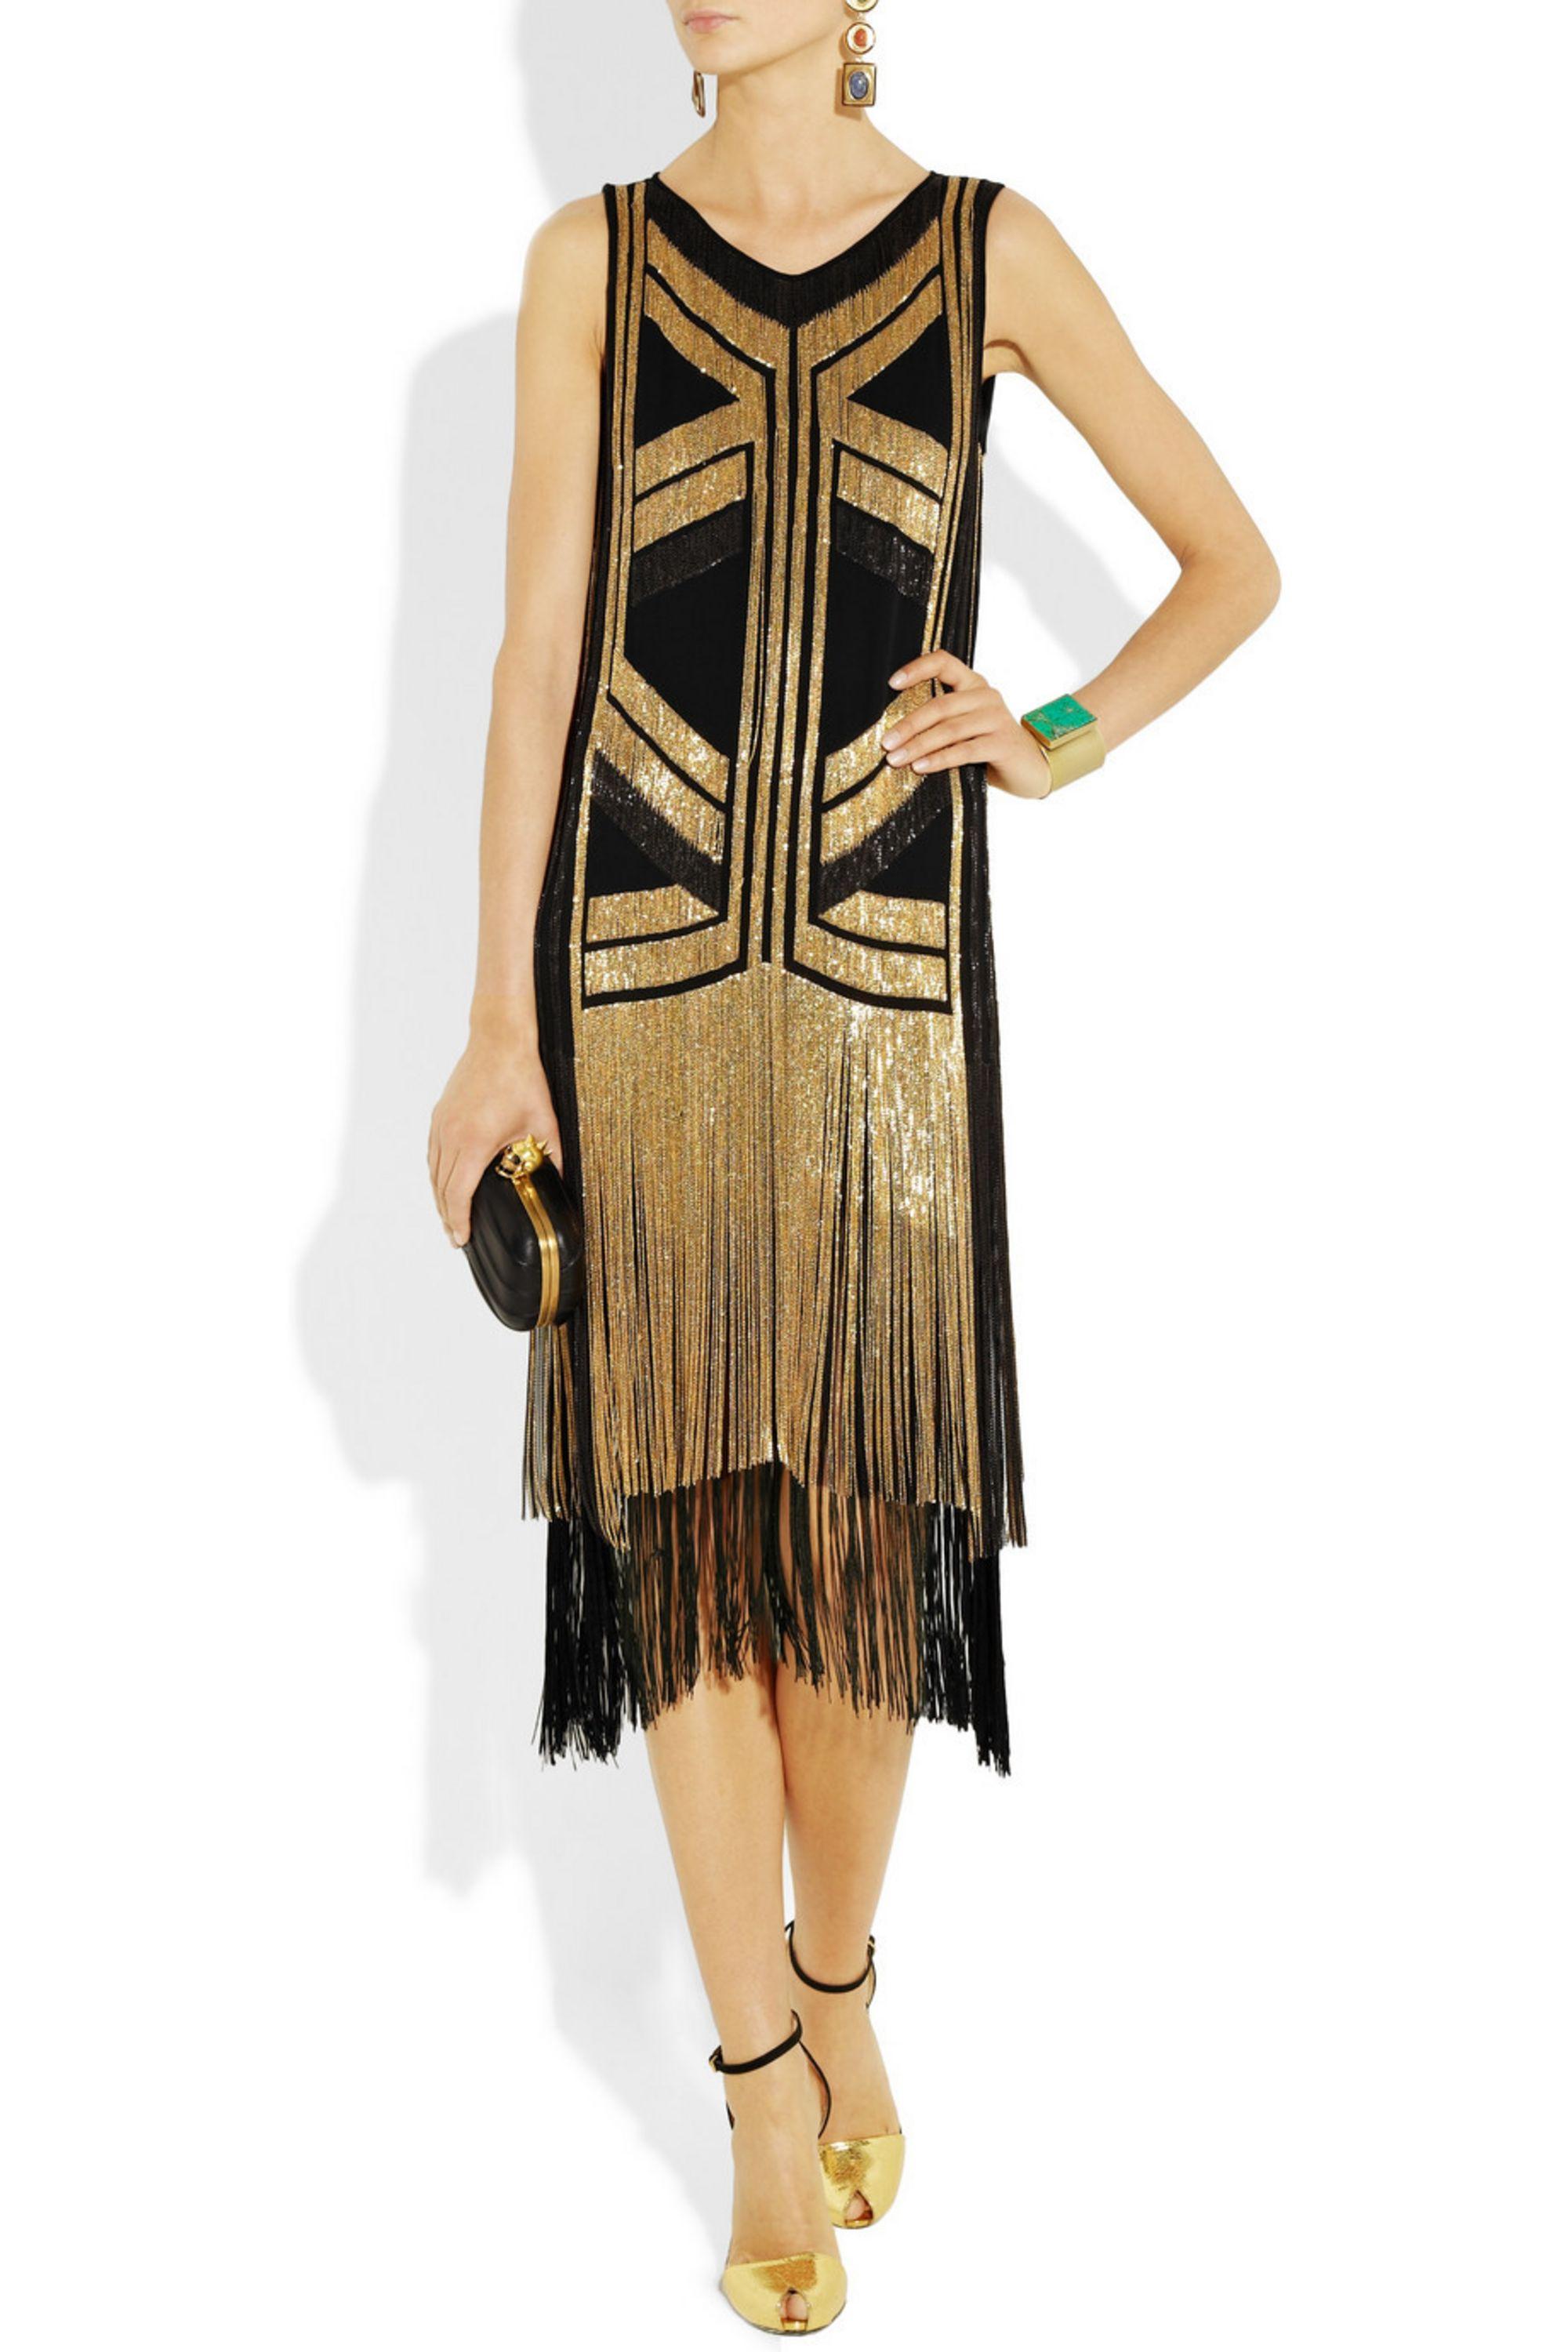 Women's Rare Gucci Fringed chain-embellished silk dress as seen on Taylor Swift